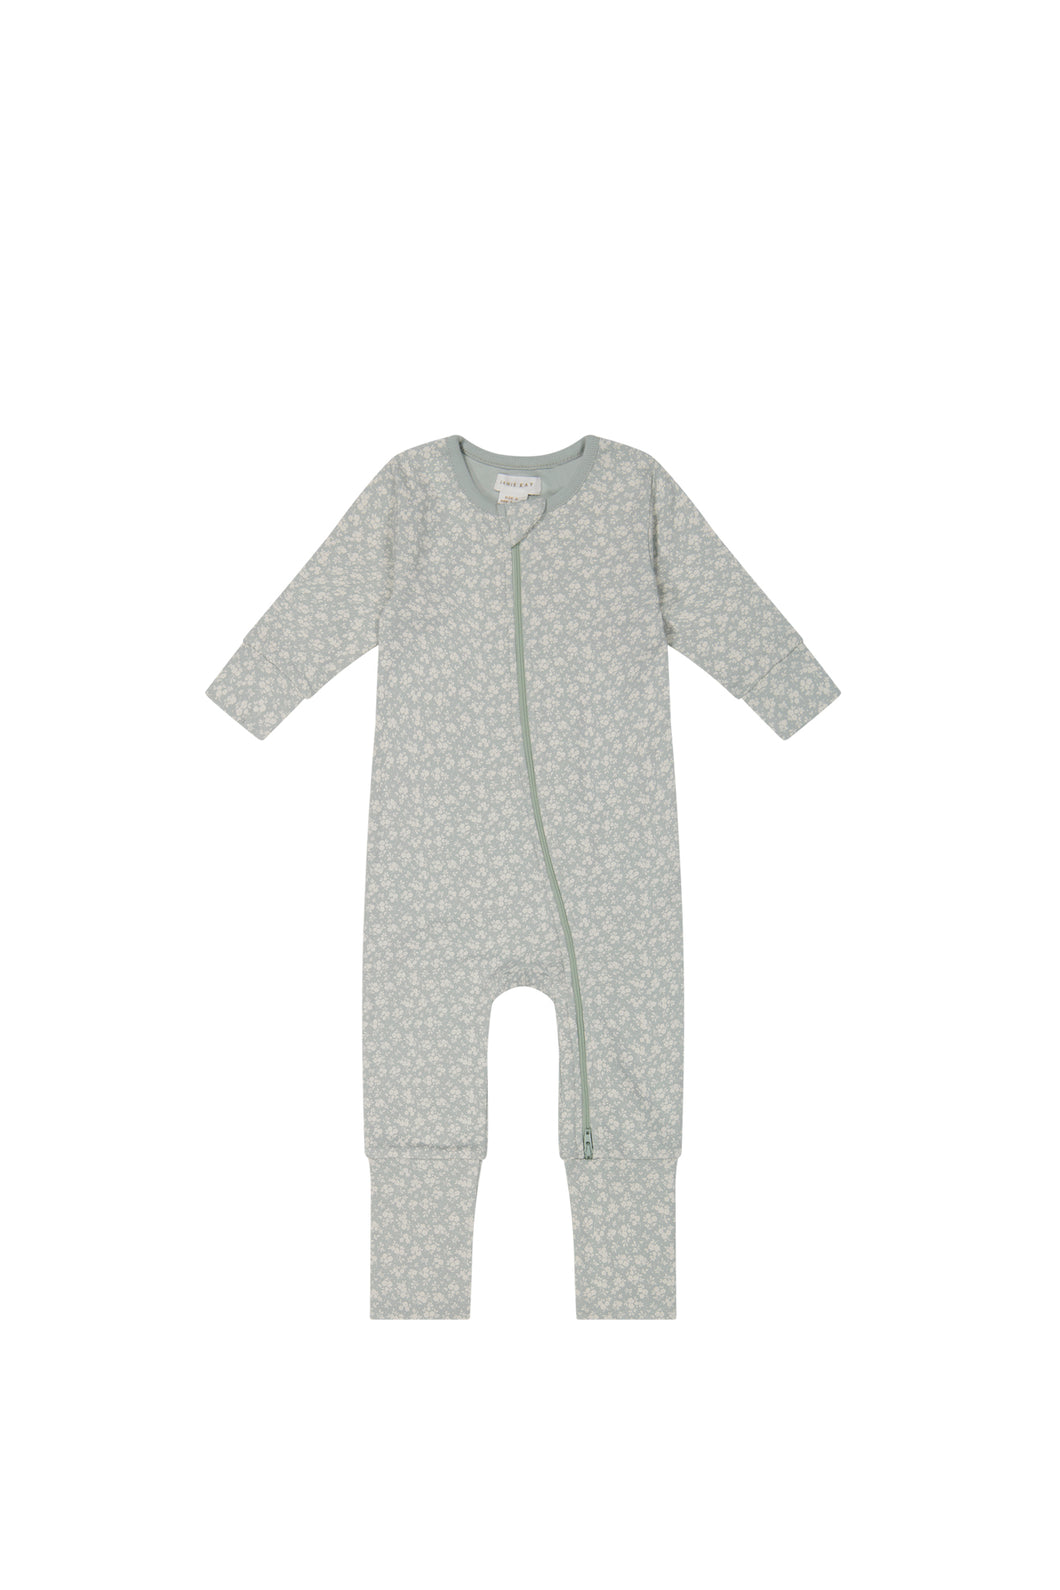 Baby blue jumpsuit with zipper from top to feet. White floral print over baby blue colour. 